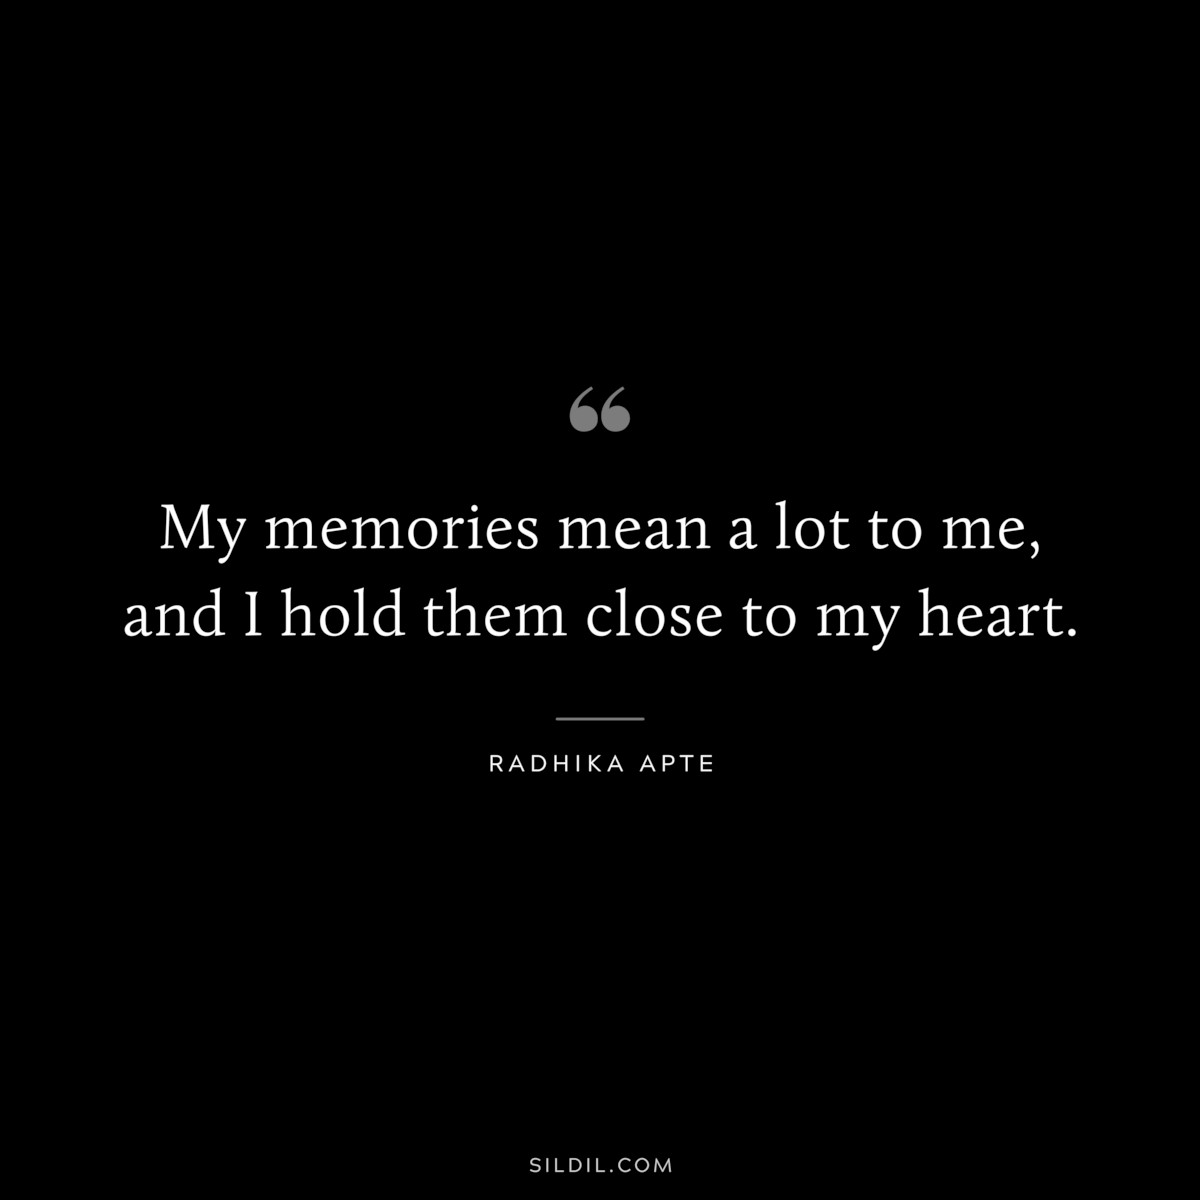 My memories mean a lot to me, and I hold them close to my heart. ― Radhika Apte